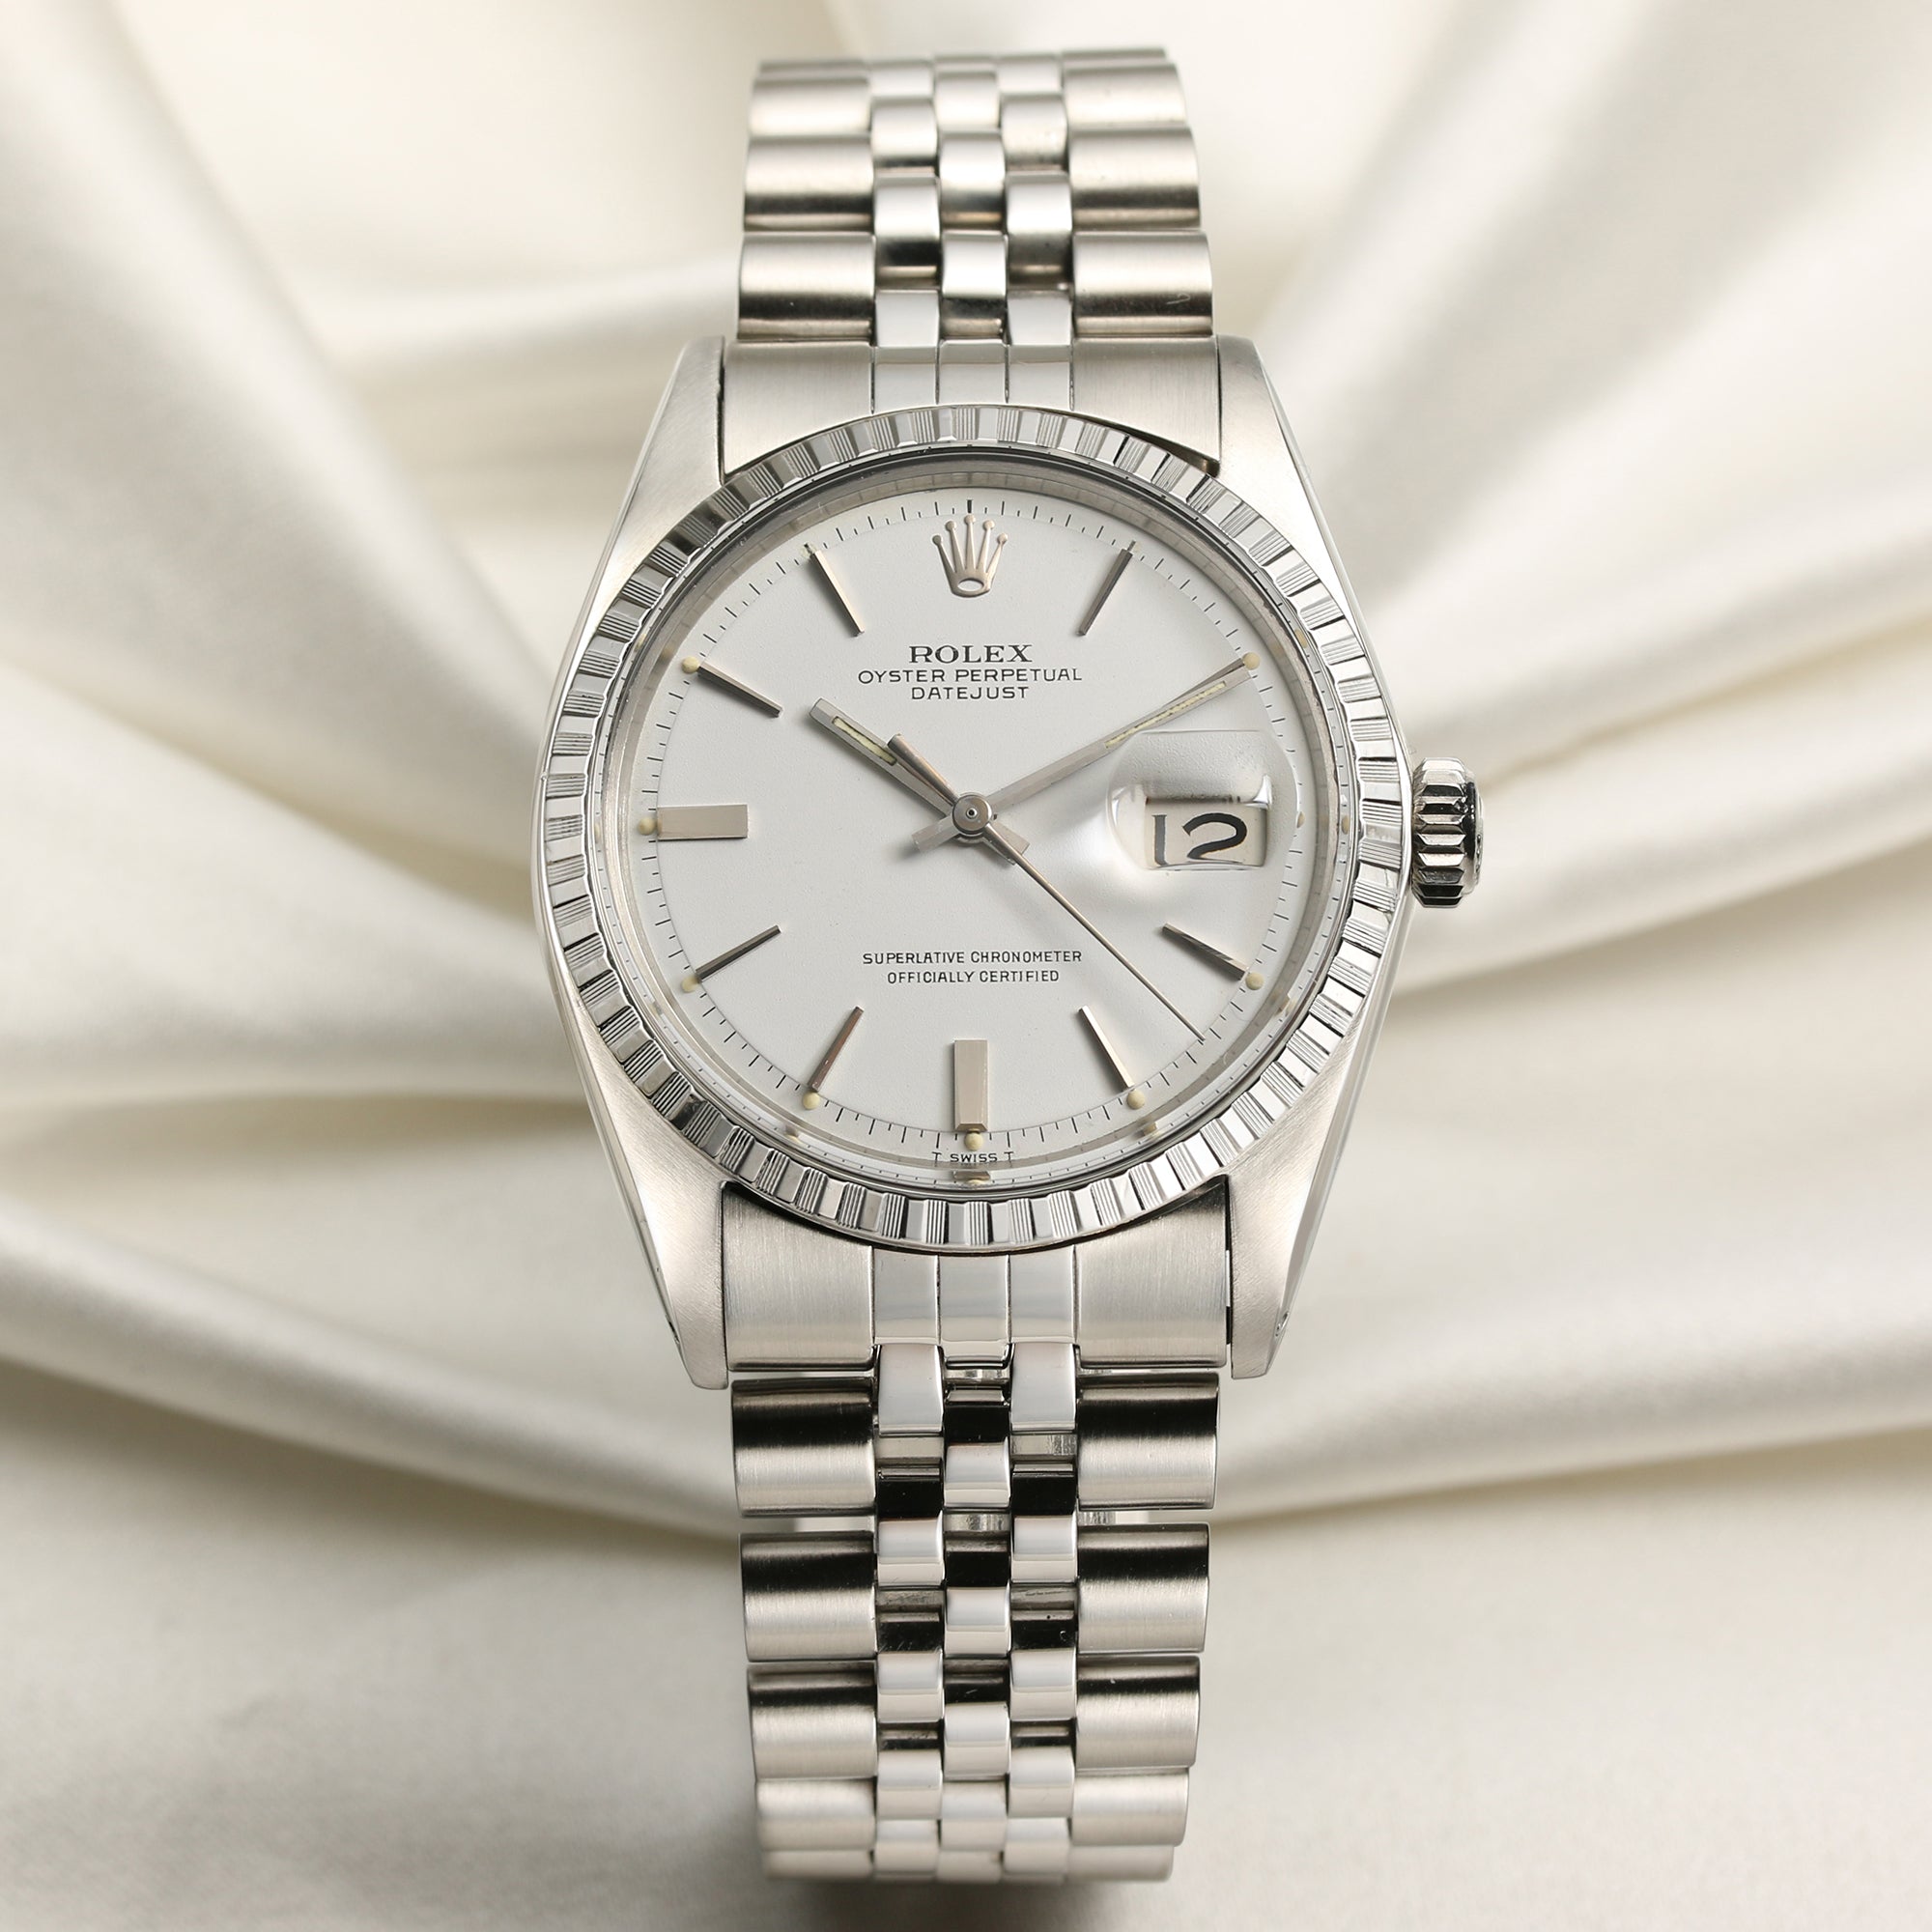 Vintage Rolex 1603 Stainless Steel Dial – Collectors